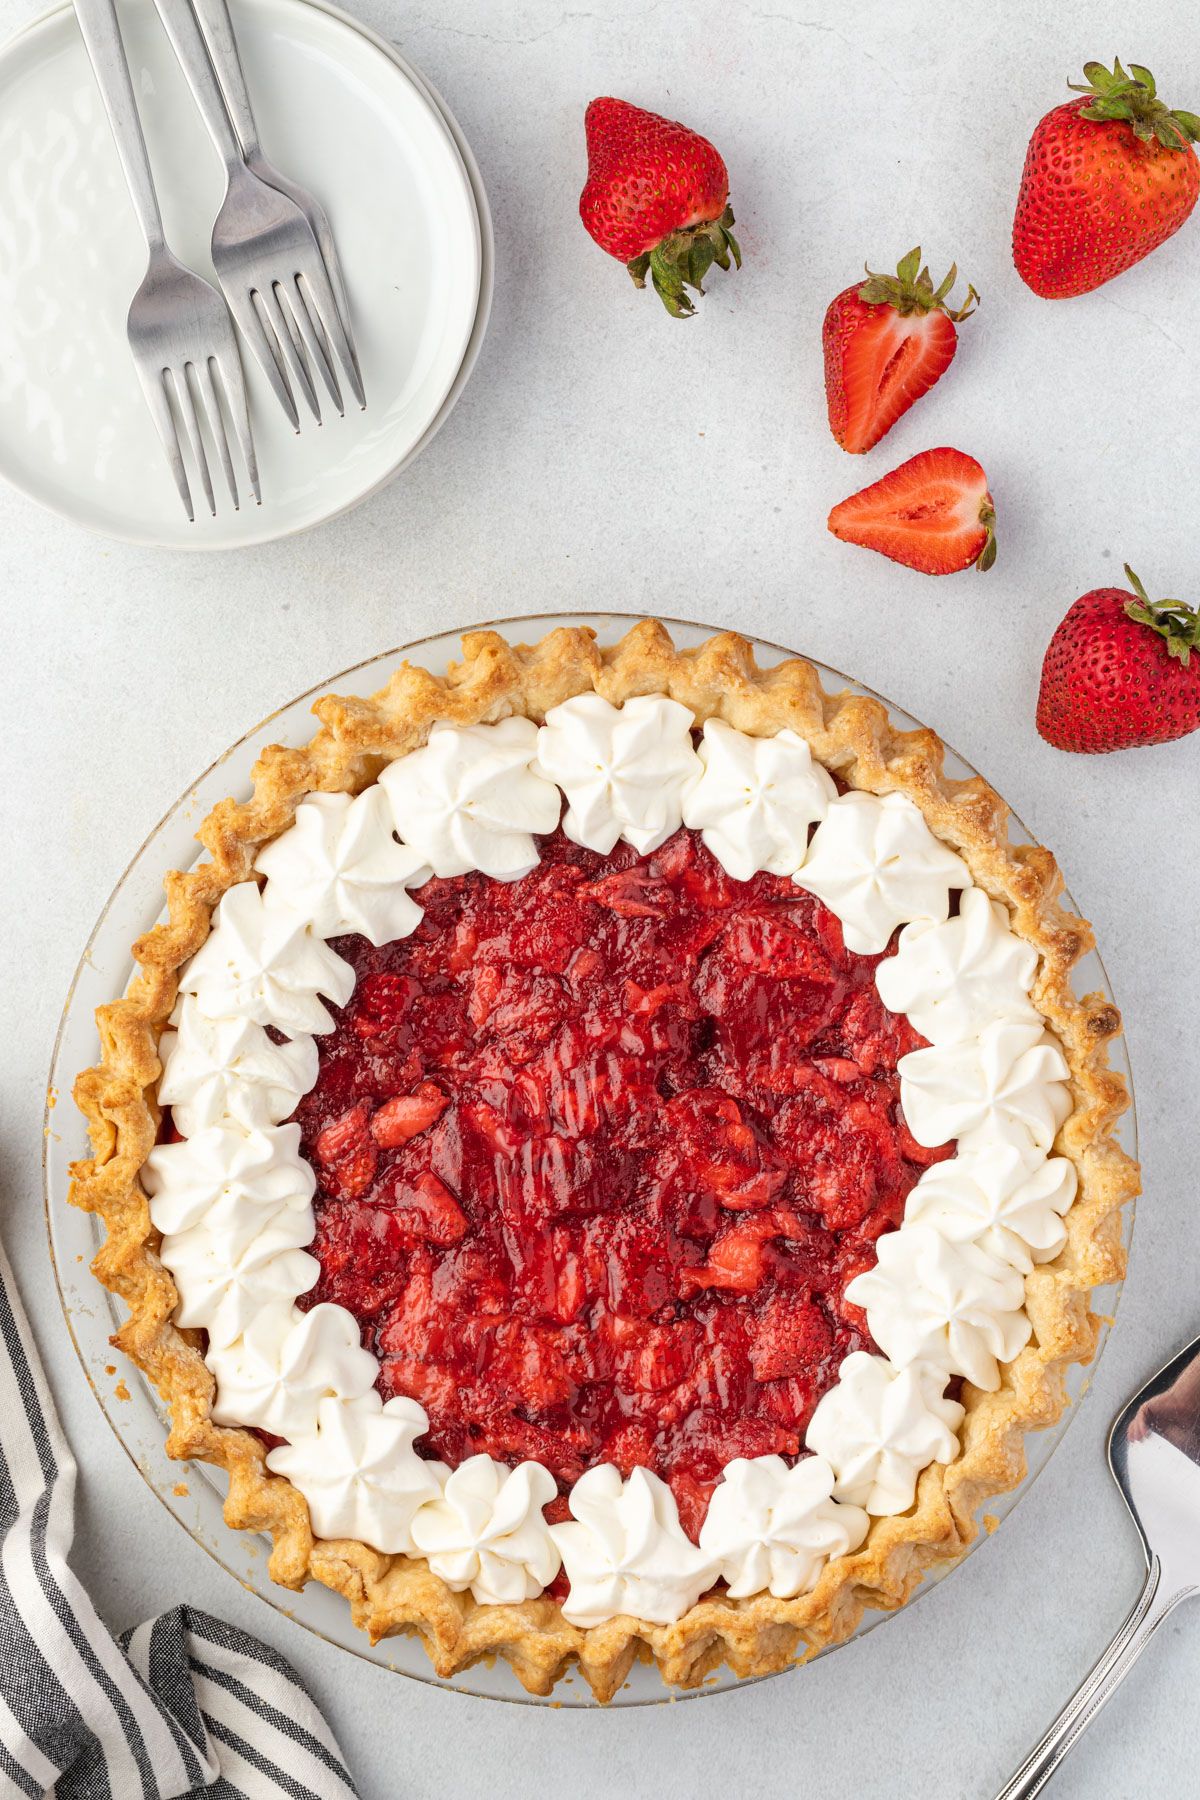 Overhead of an uncut strawberry pie made with frozen strawberries and topped with dollops of whipped cream.